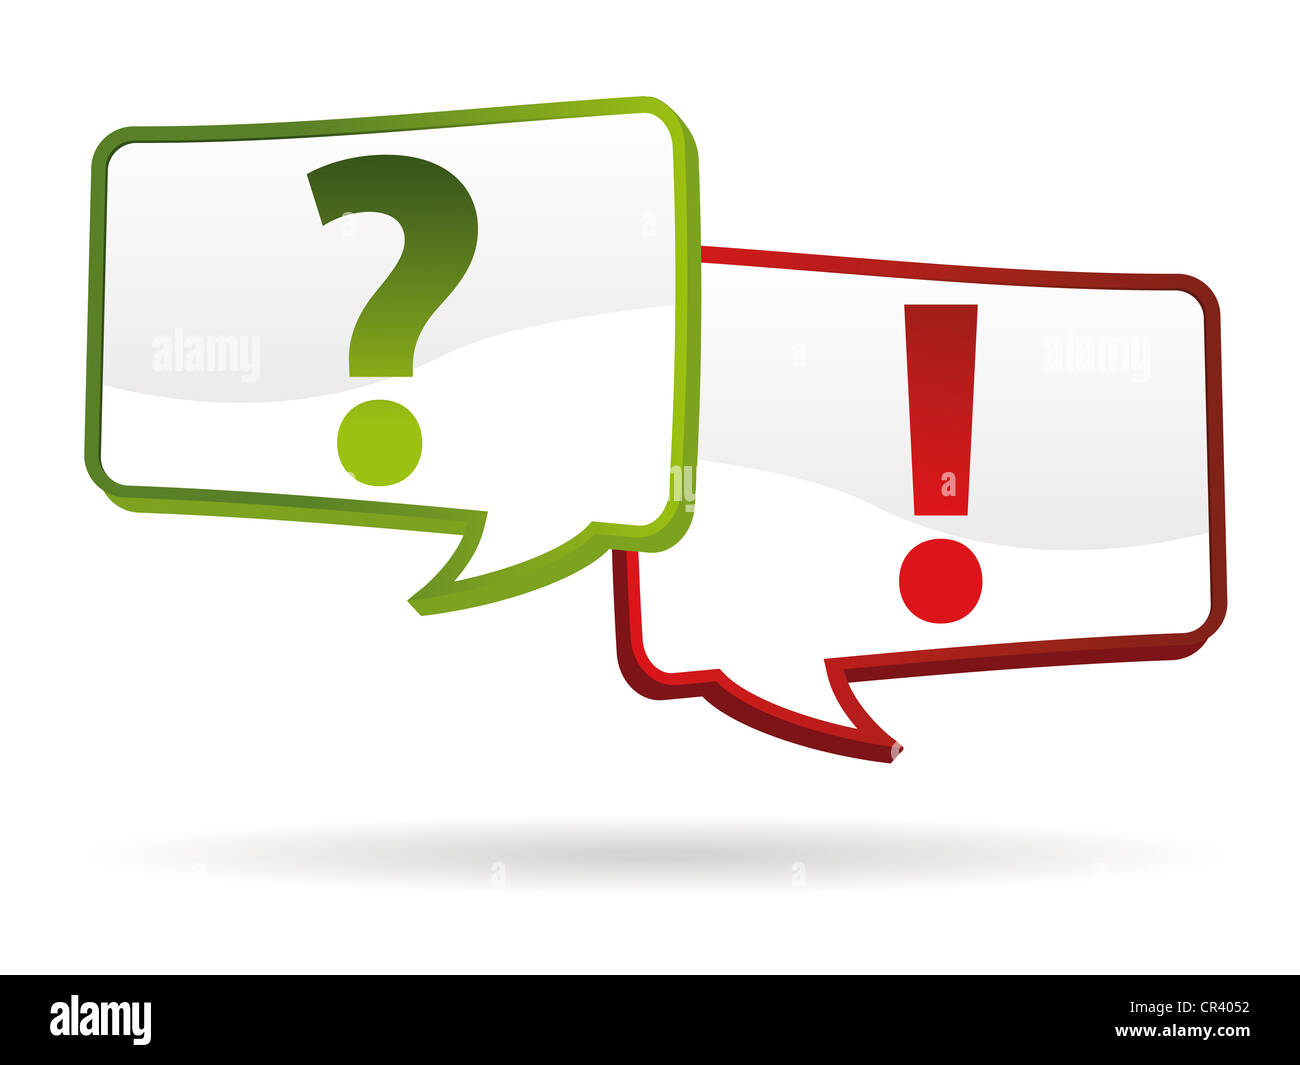 question-and-answer-signs-in-3d-effect-stock-photo-alamy